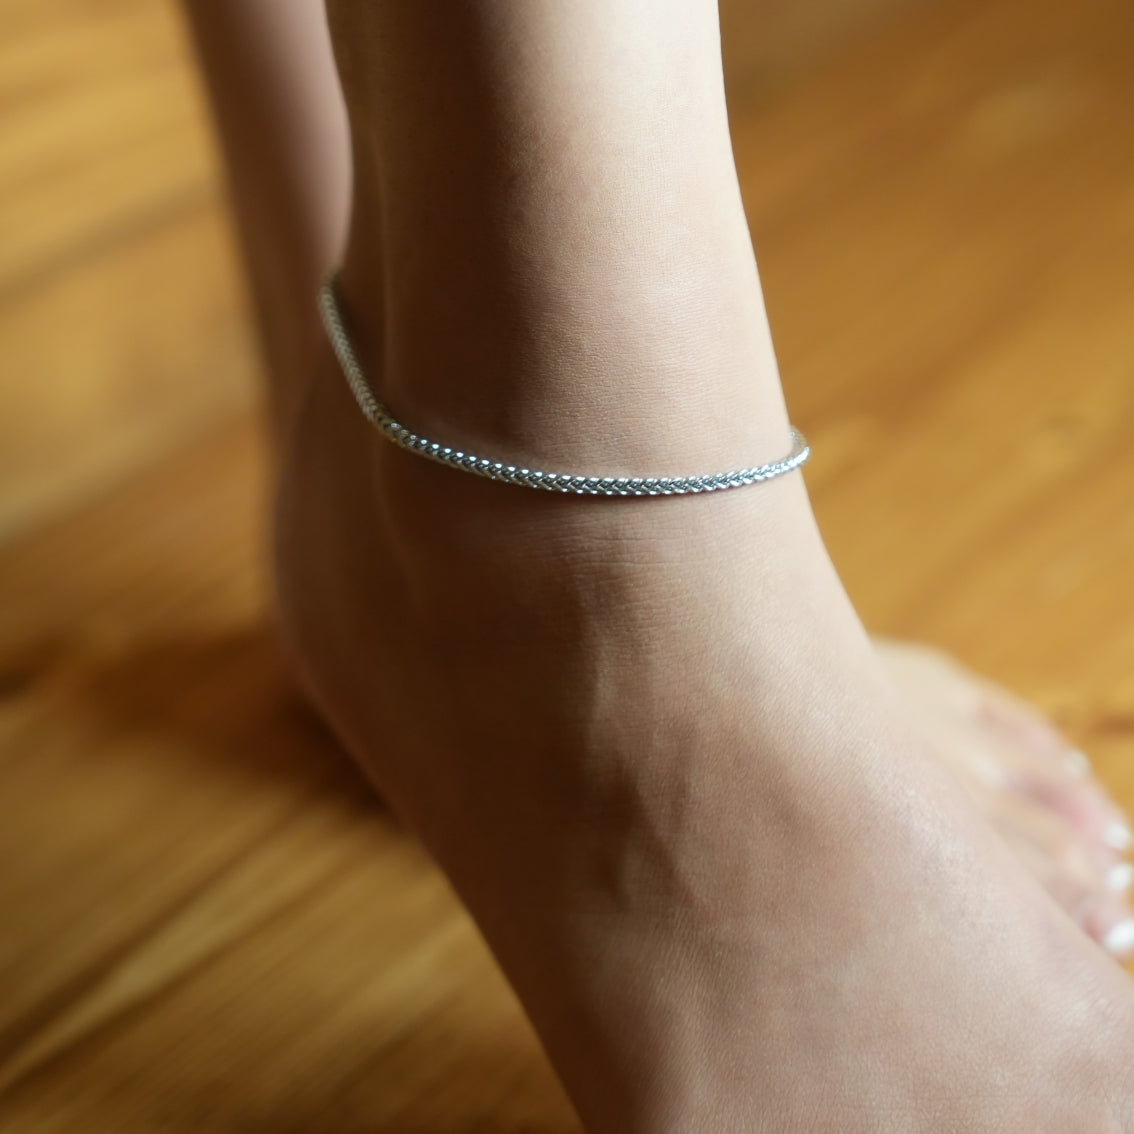 Style BILLIE LG 8832S: Cuban Link Chain Silver Anklet.